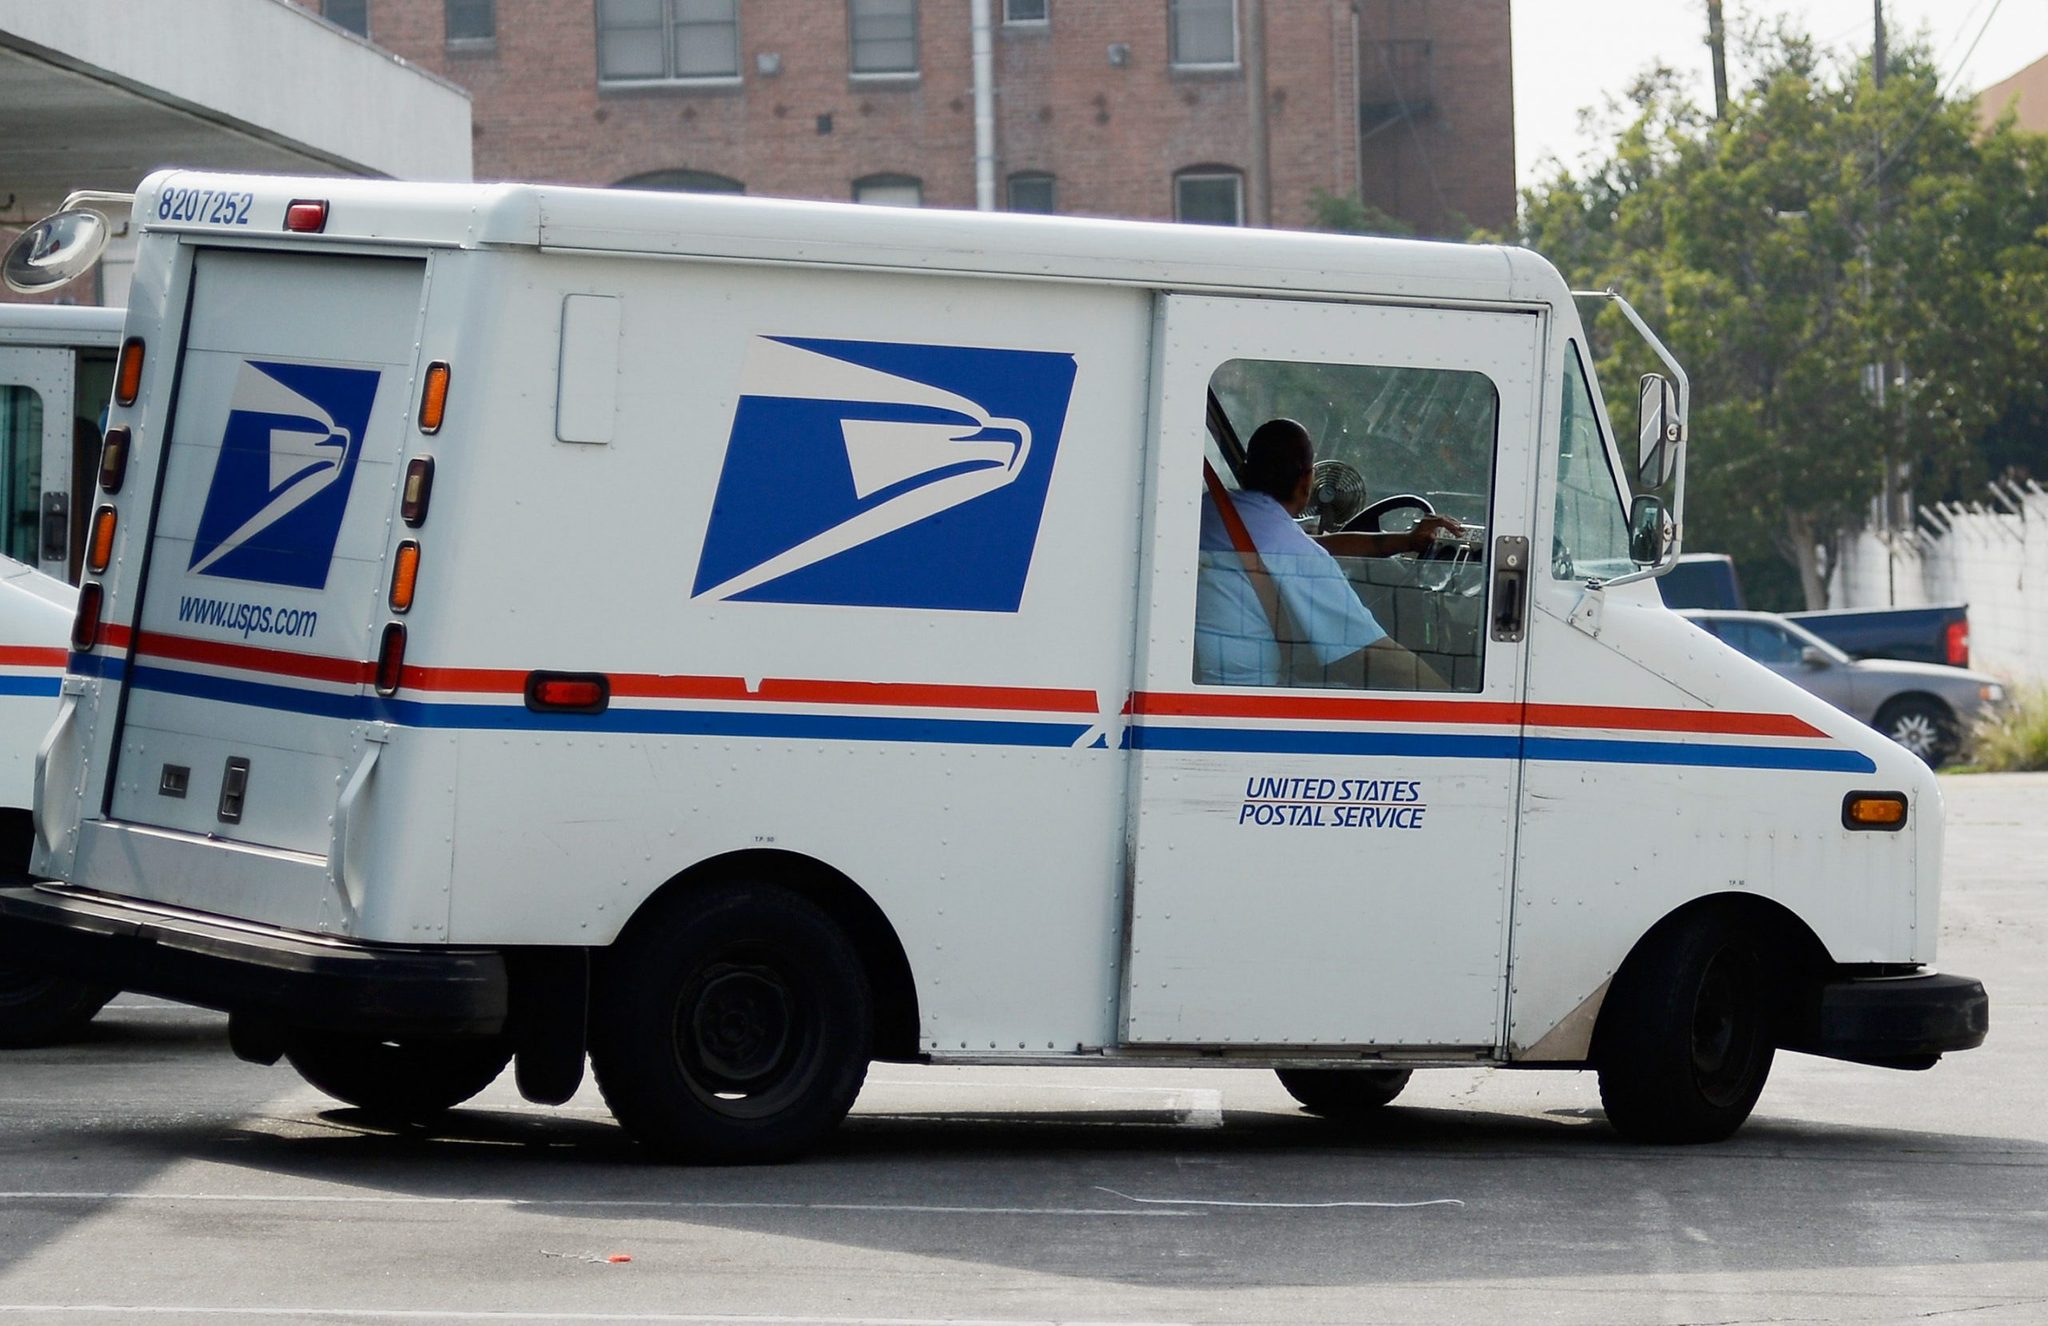 Here's What You're Legally Allowed to Gift Your Mail Carrier Reader's